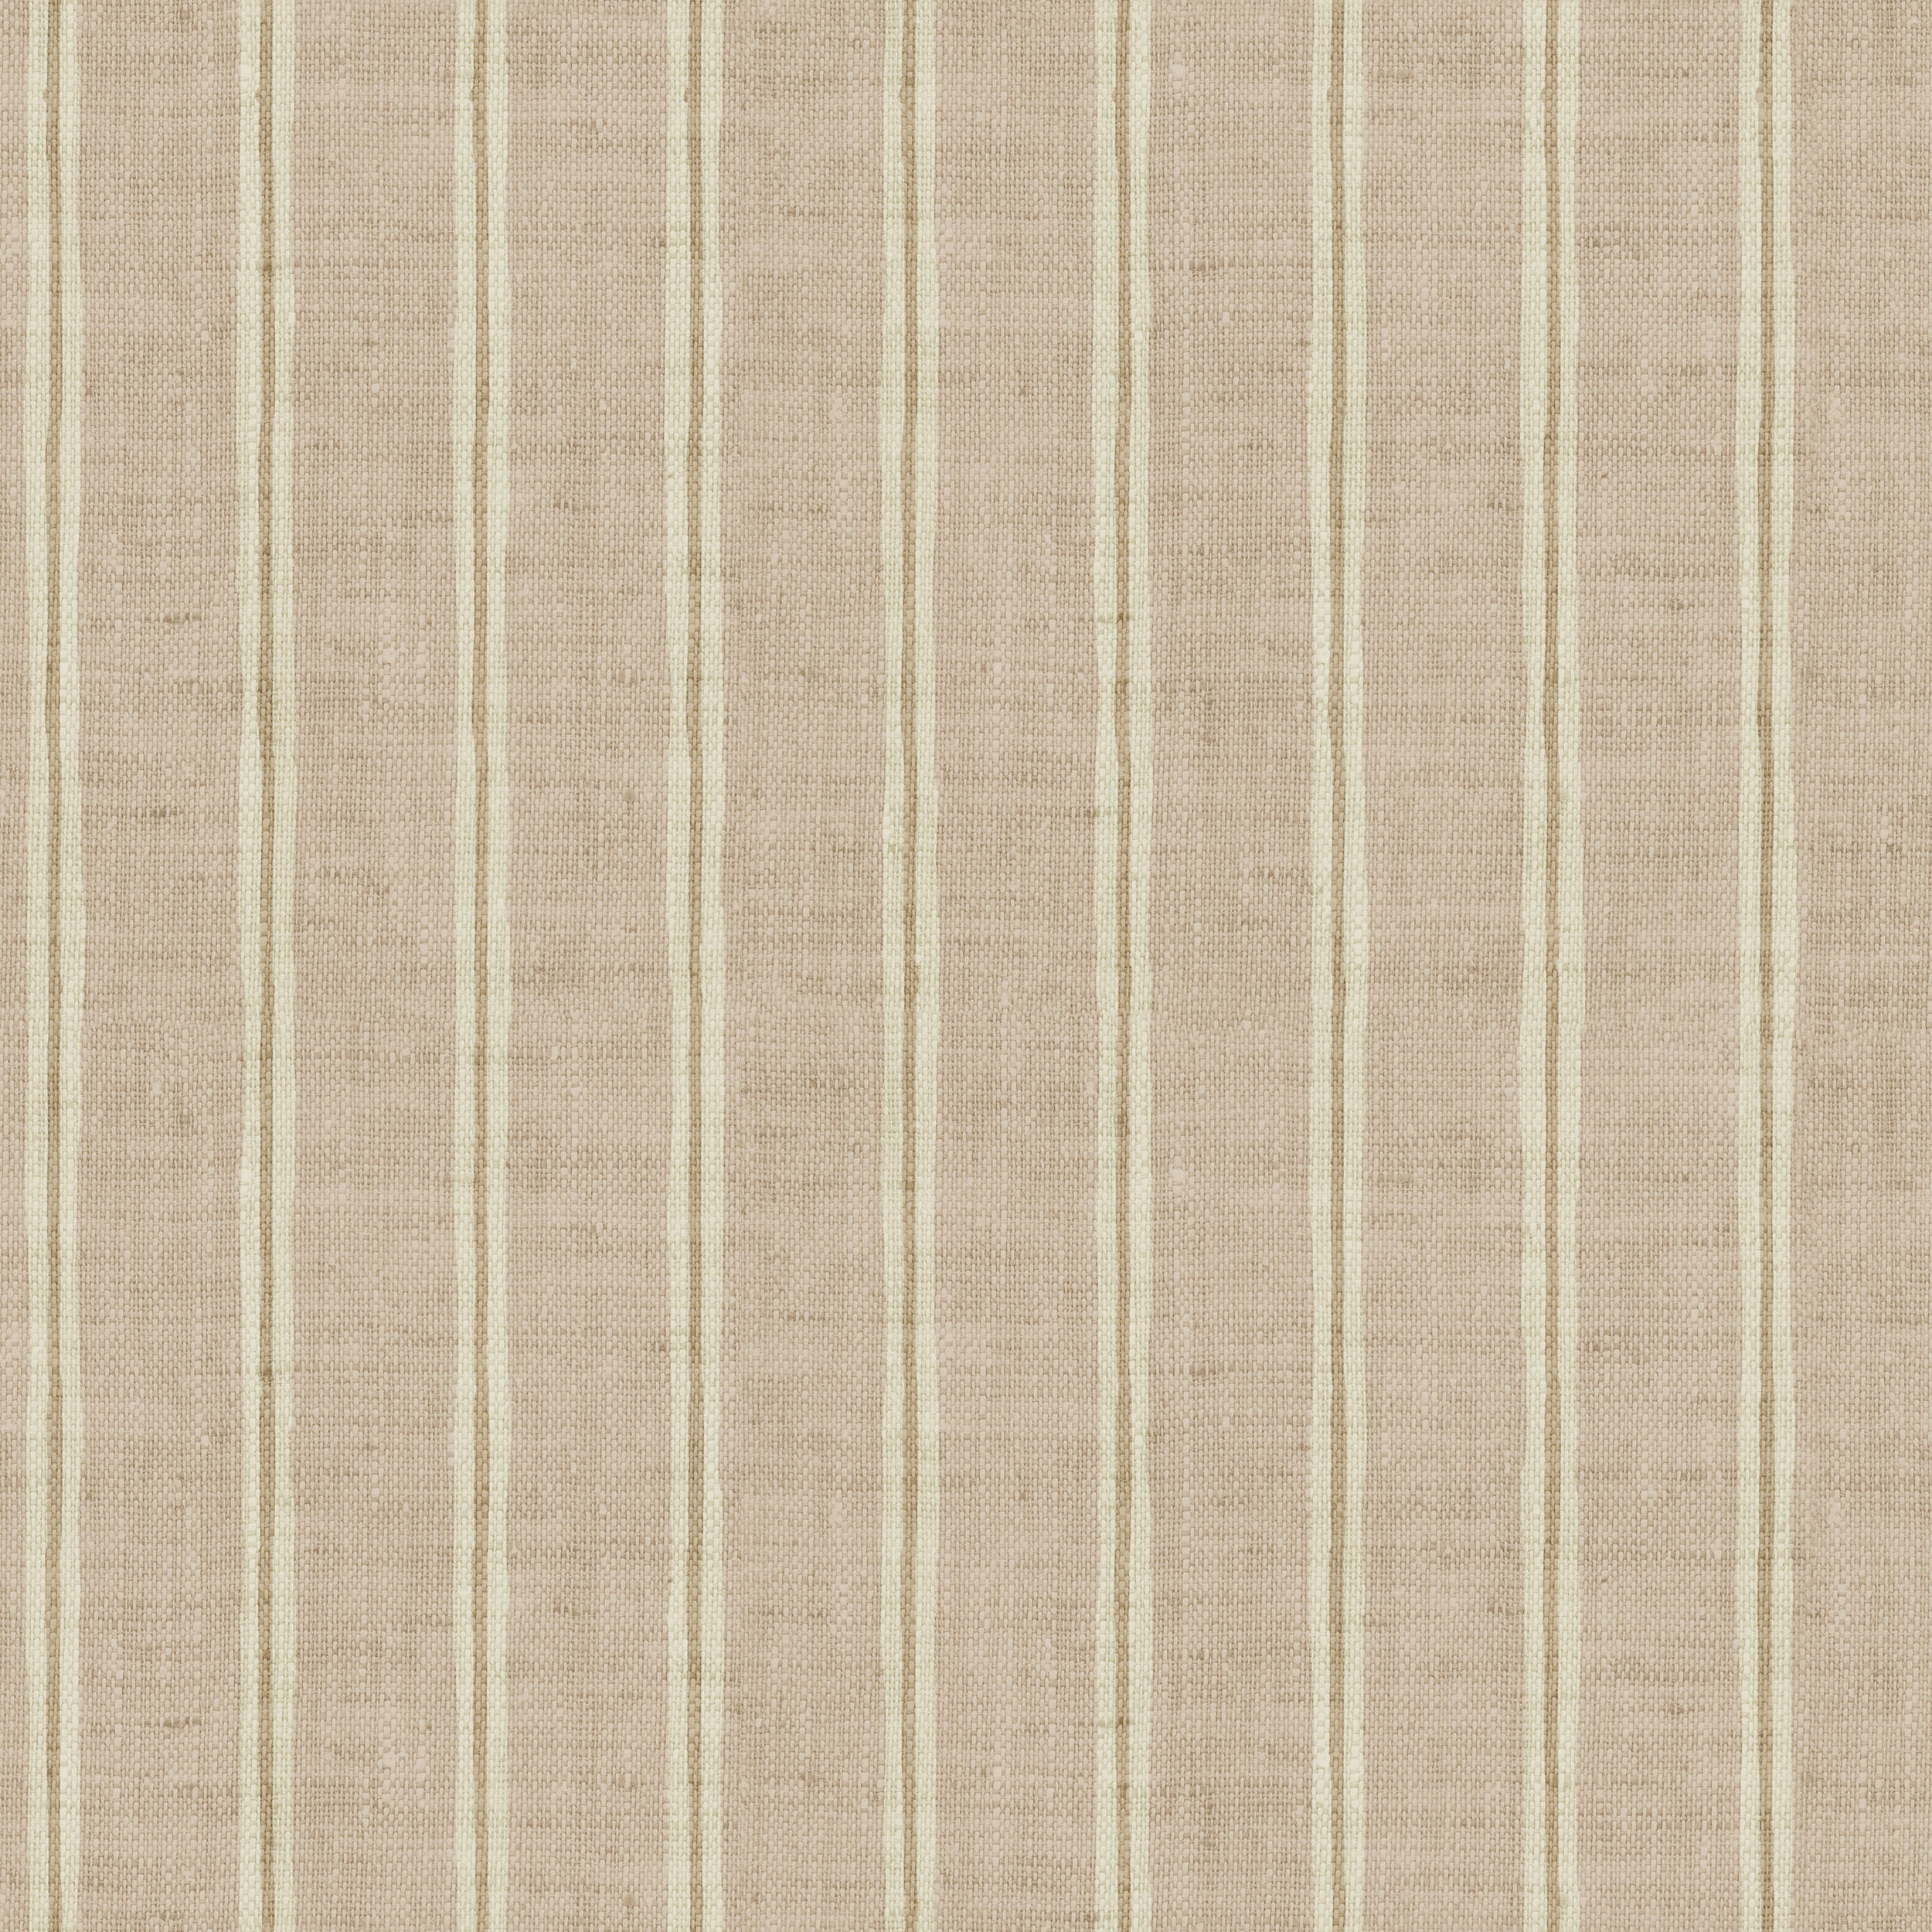 A close-up view of the 'Ticking Fabrics 2 Wallpaper', displaying a classic ticking stripe pattern in beige and cream. The timeless design mimics the look of woven fabric, offering a subtle, textured appearance that adds depth and warmth to any space.